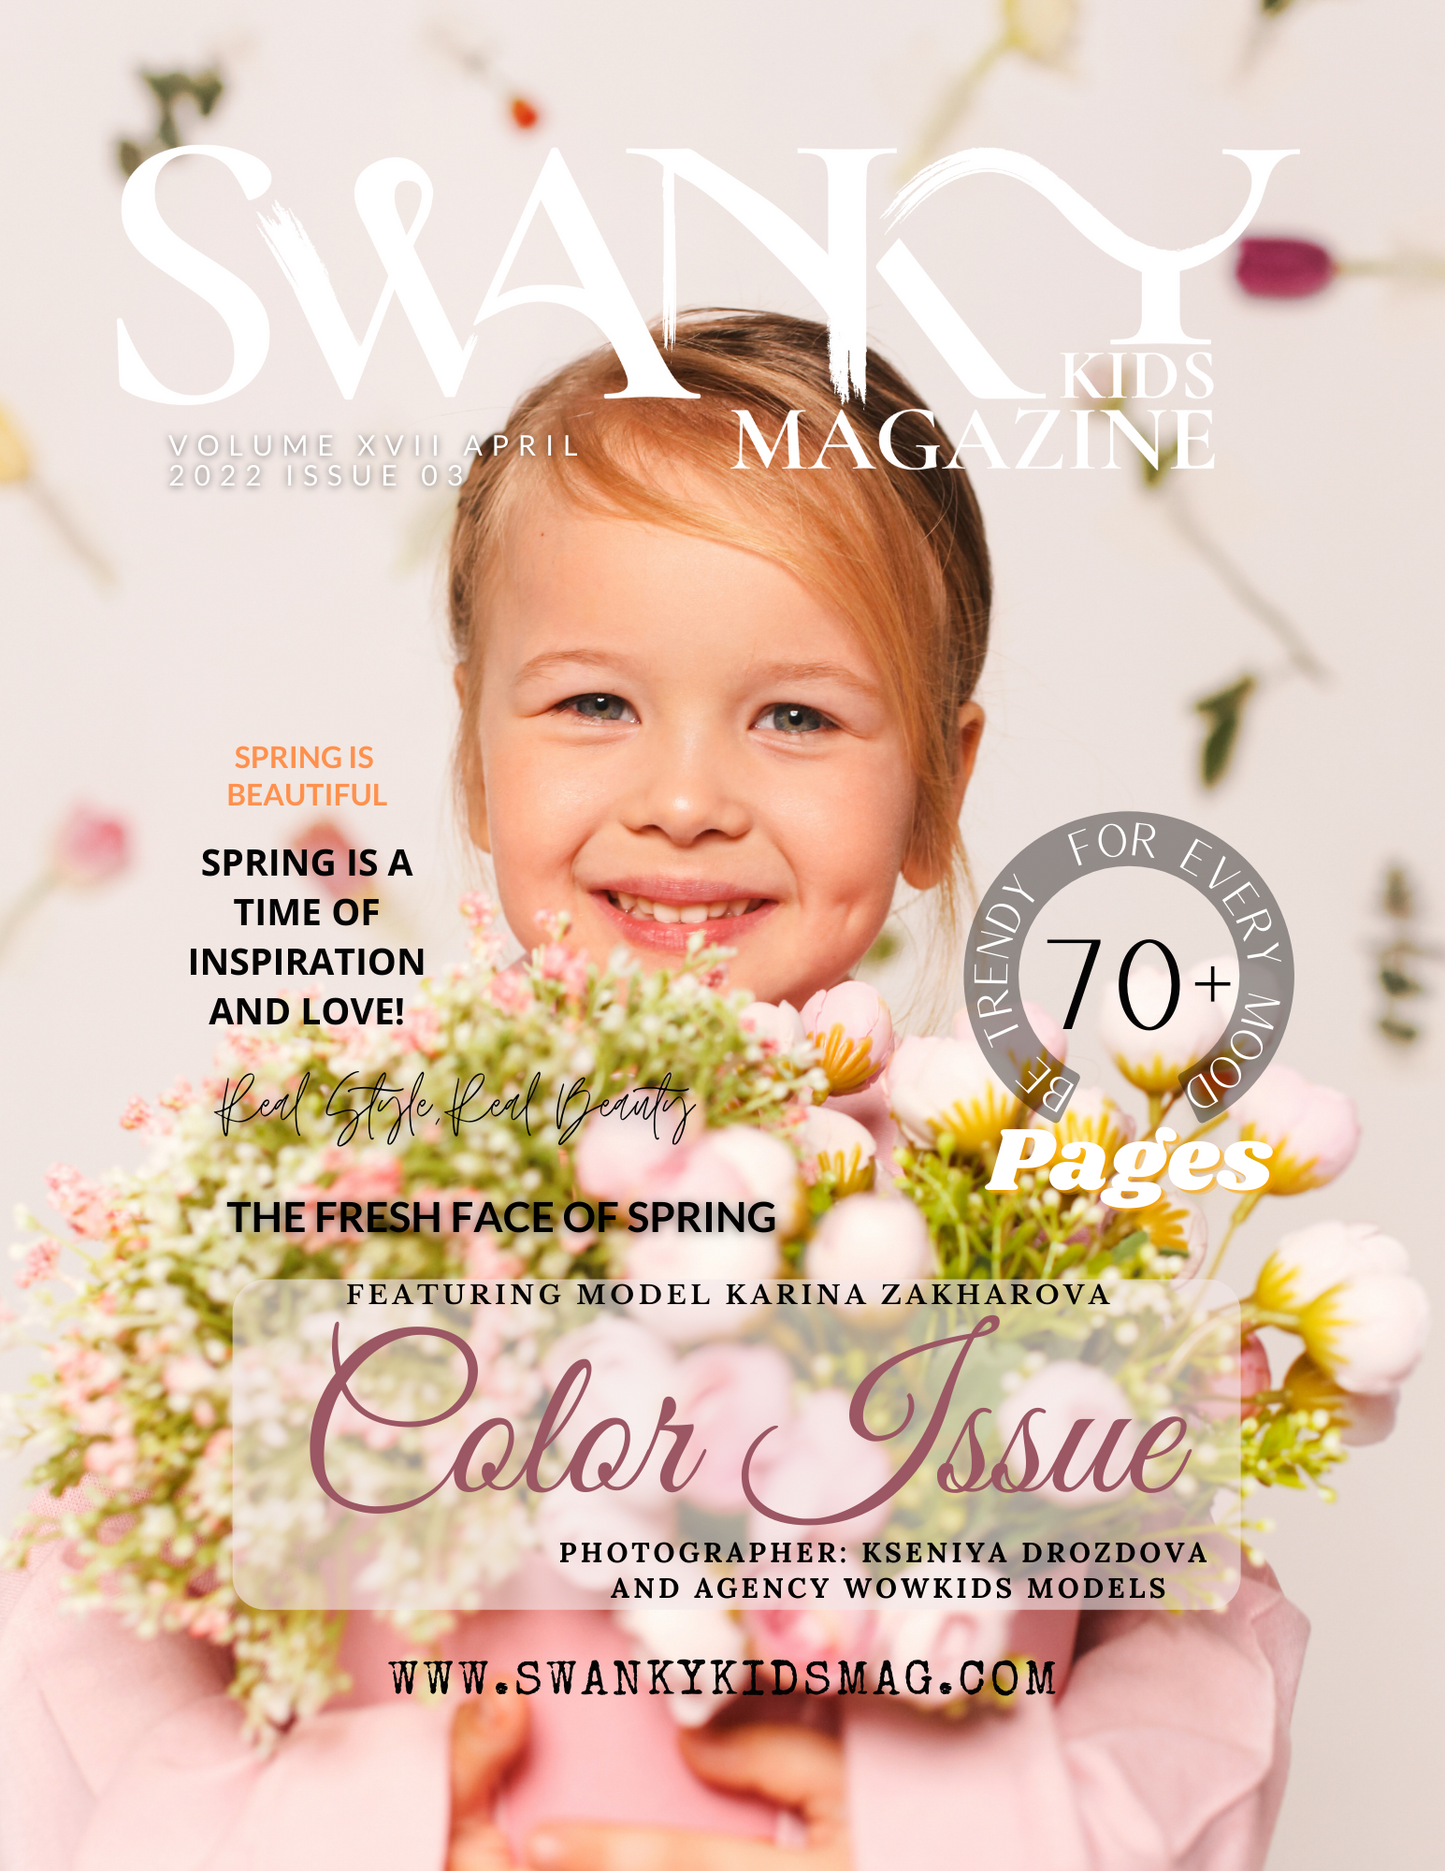 Swanky Kids Magazine Easter Special 2022 VOL XVII Issue 3